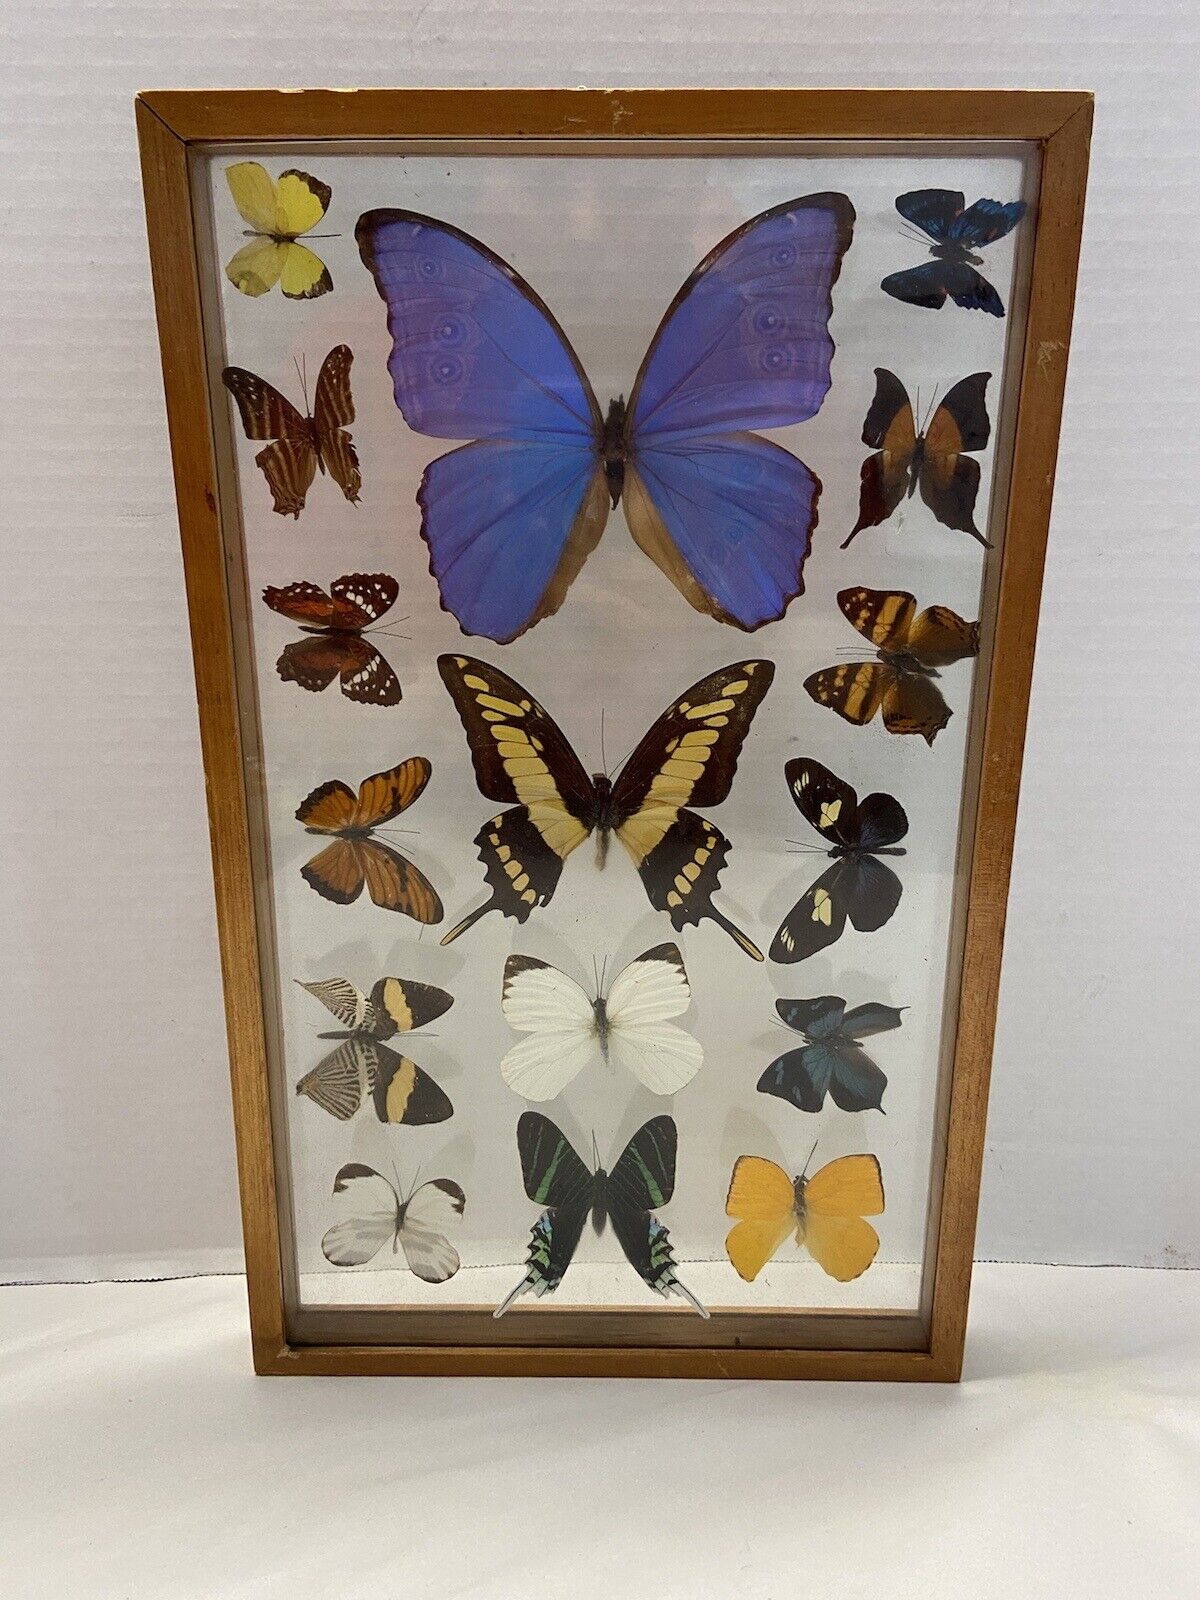 16 Real Butterfly Collection Taxidermy Display Wood Framed vintage